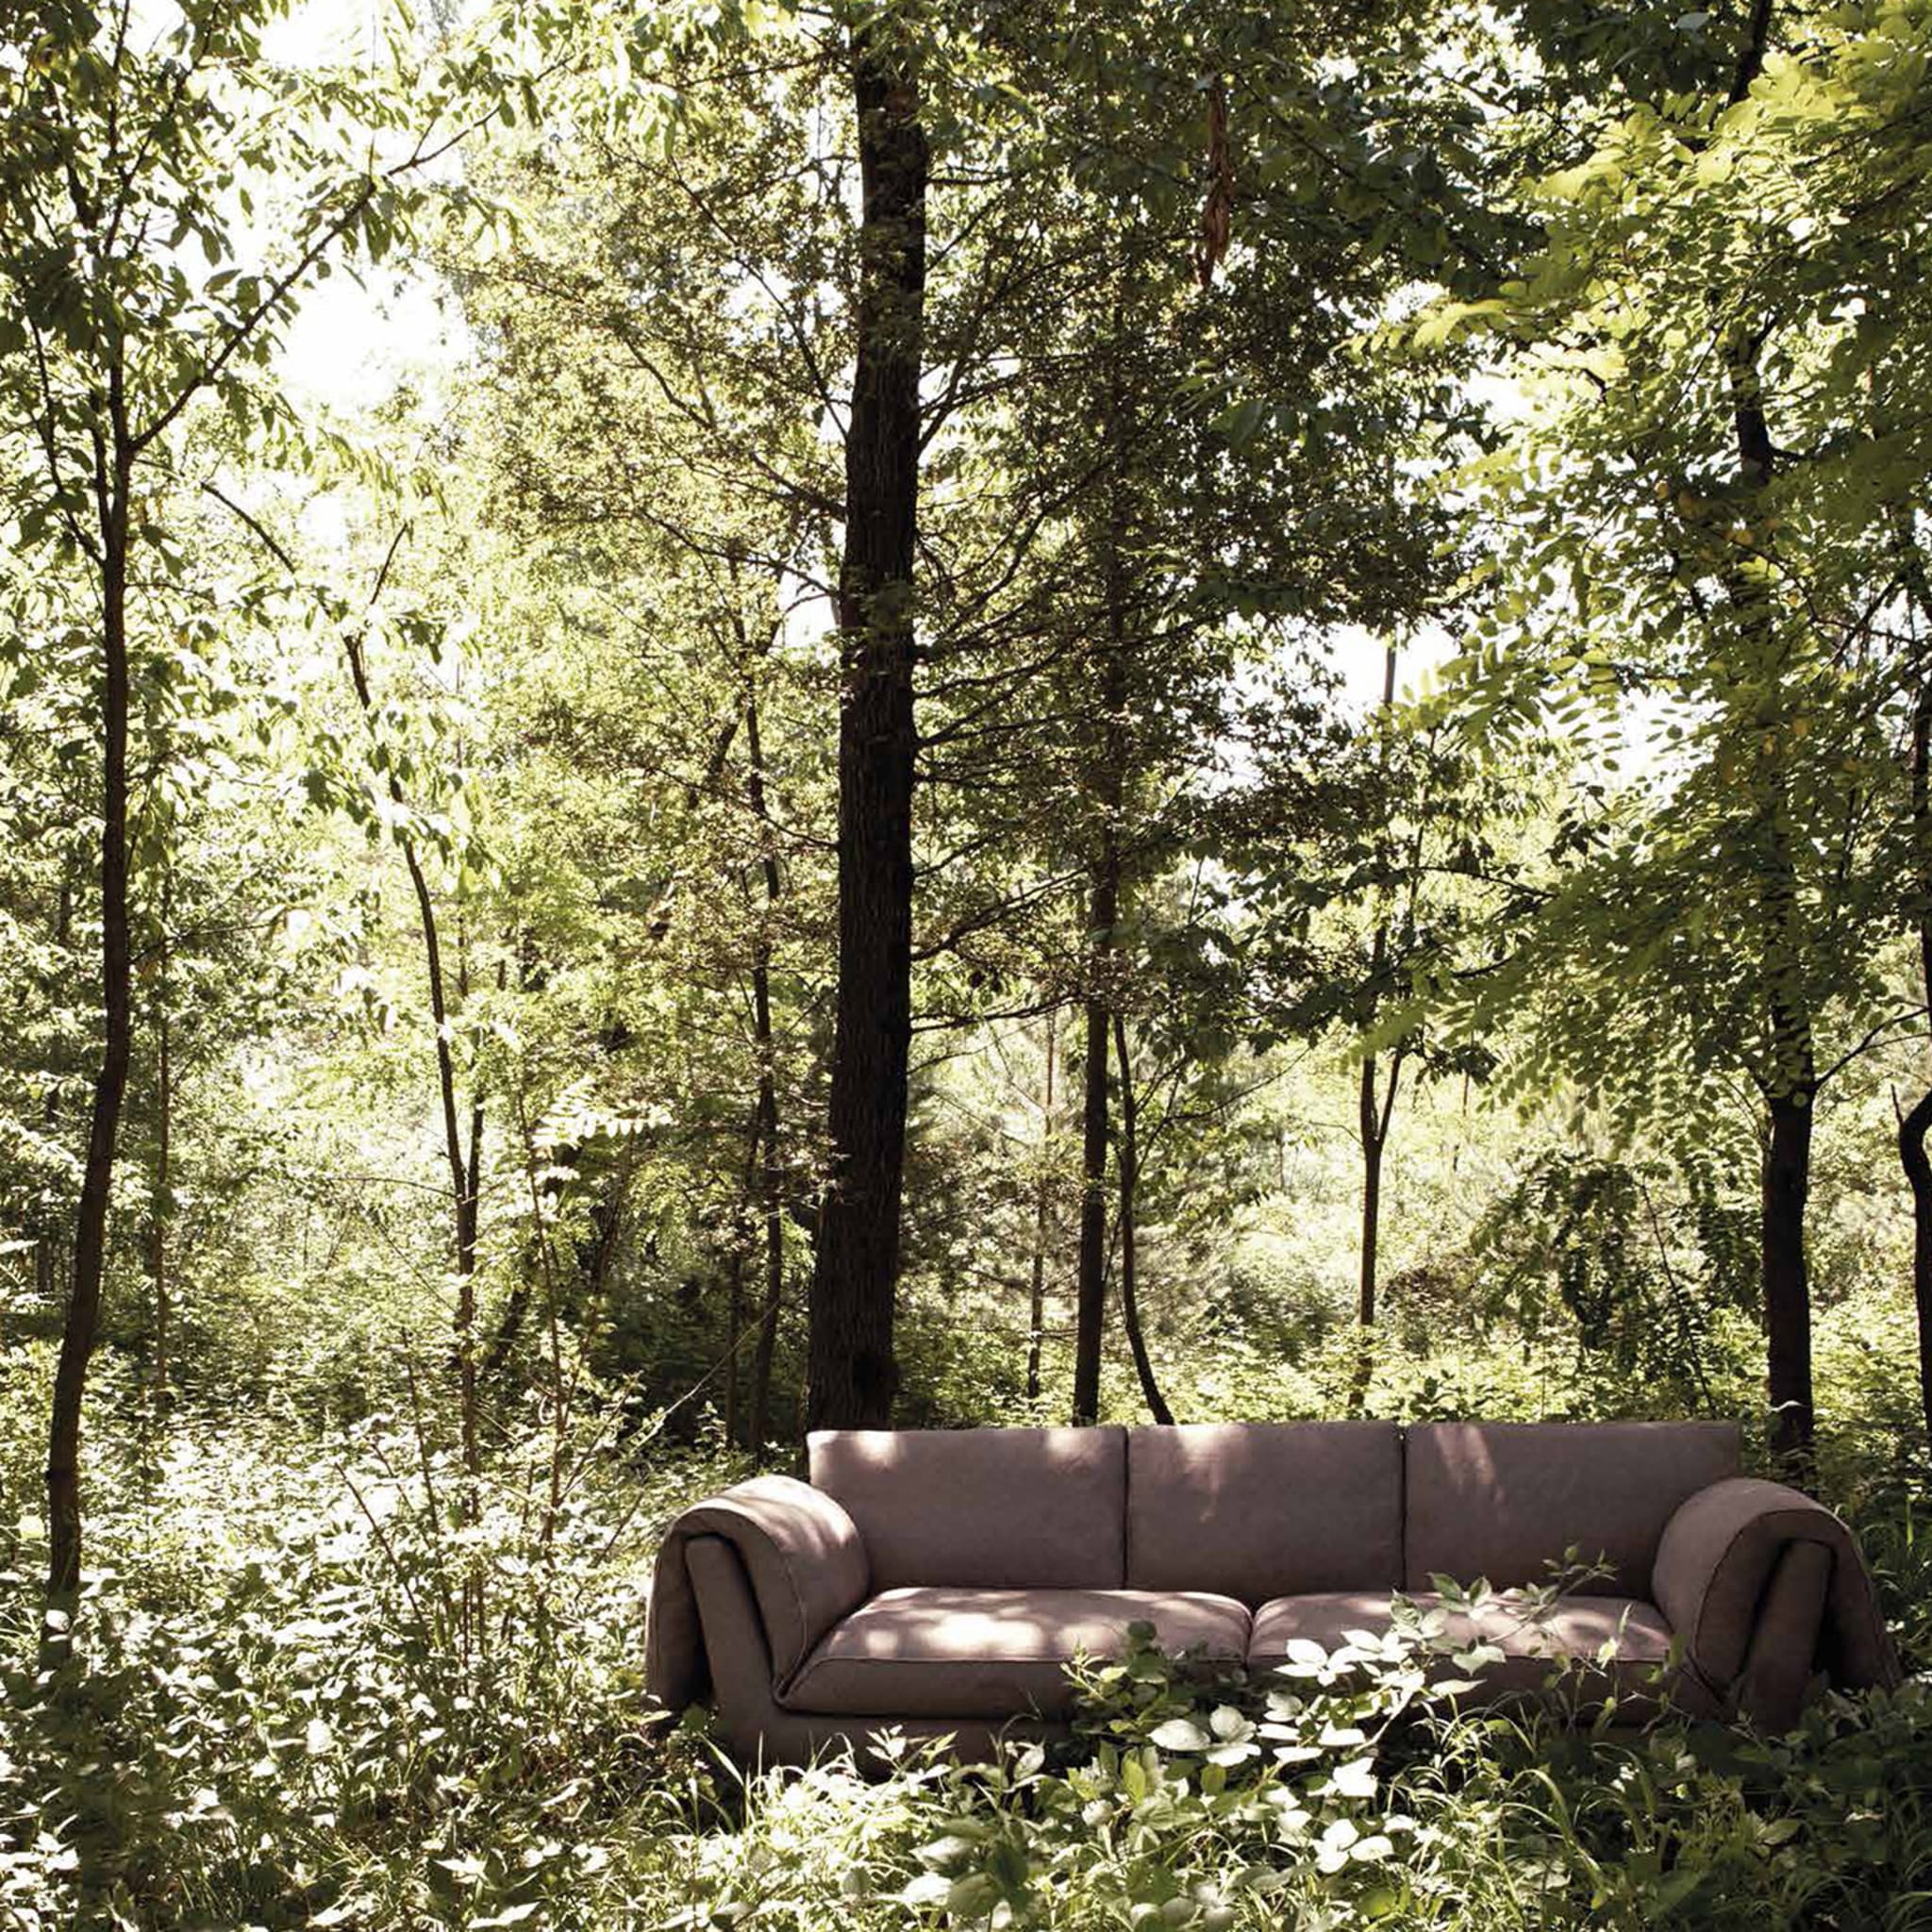 Casquet Ecological Sofa by ddpstudio - Alternative view 4